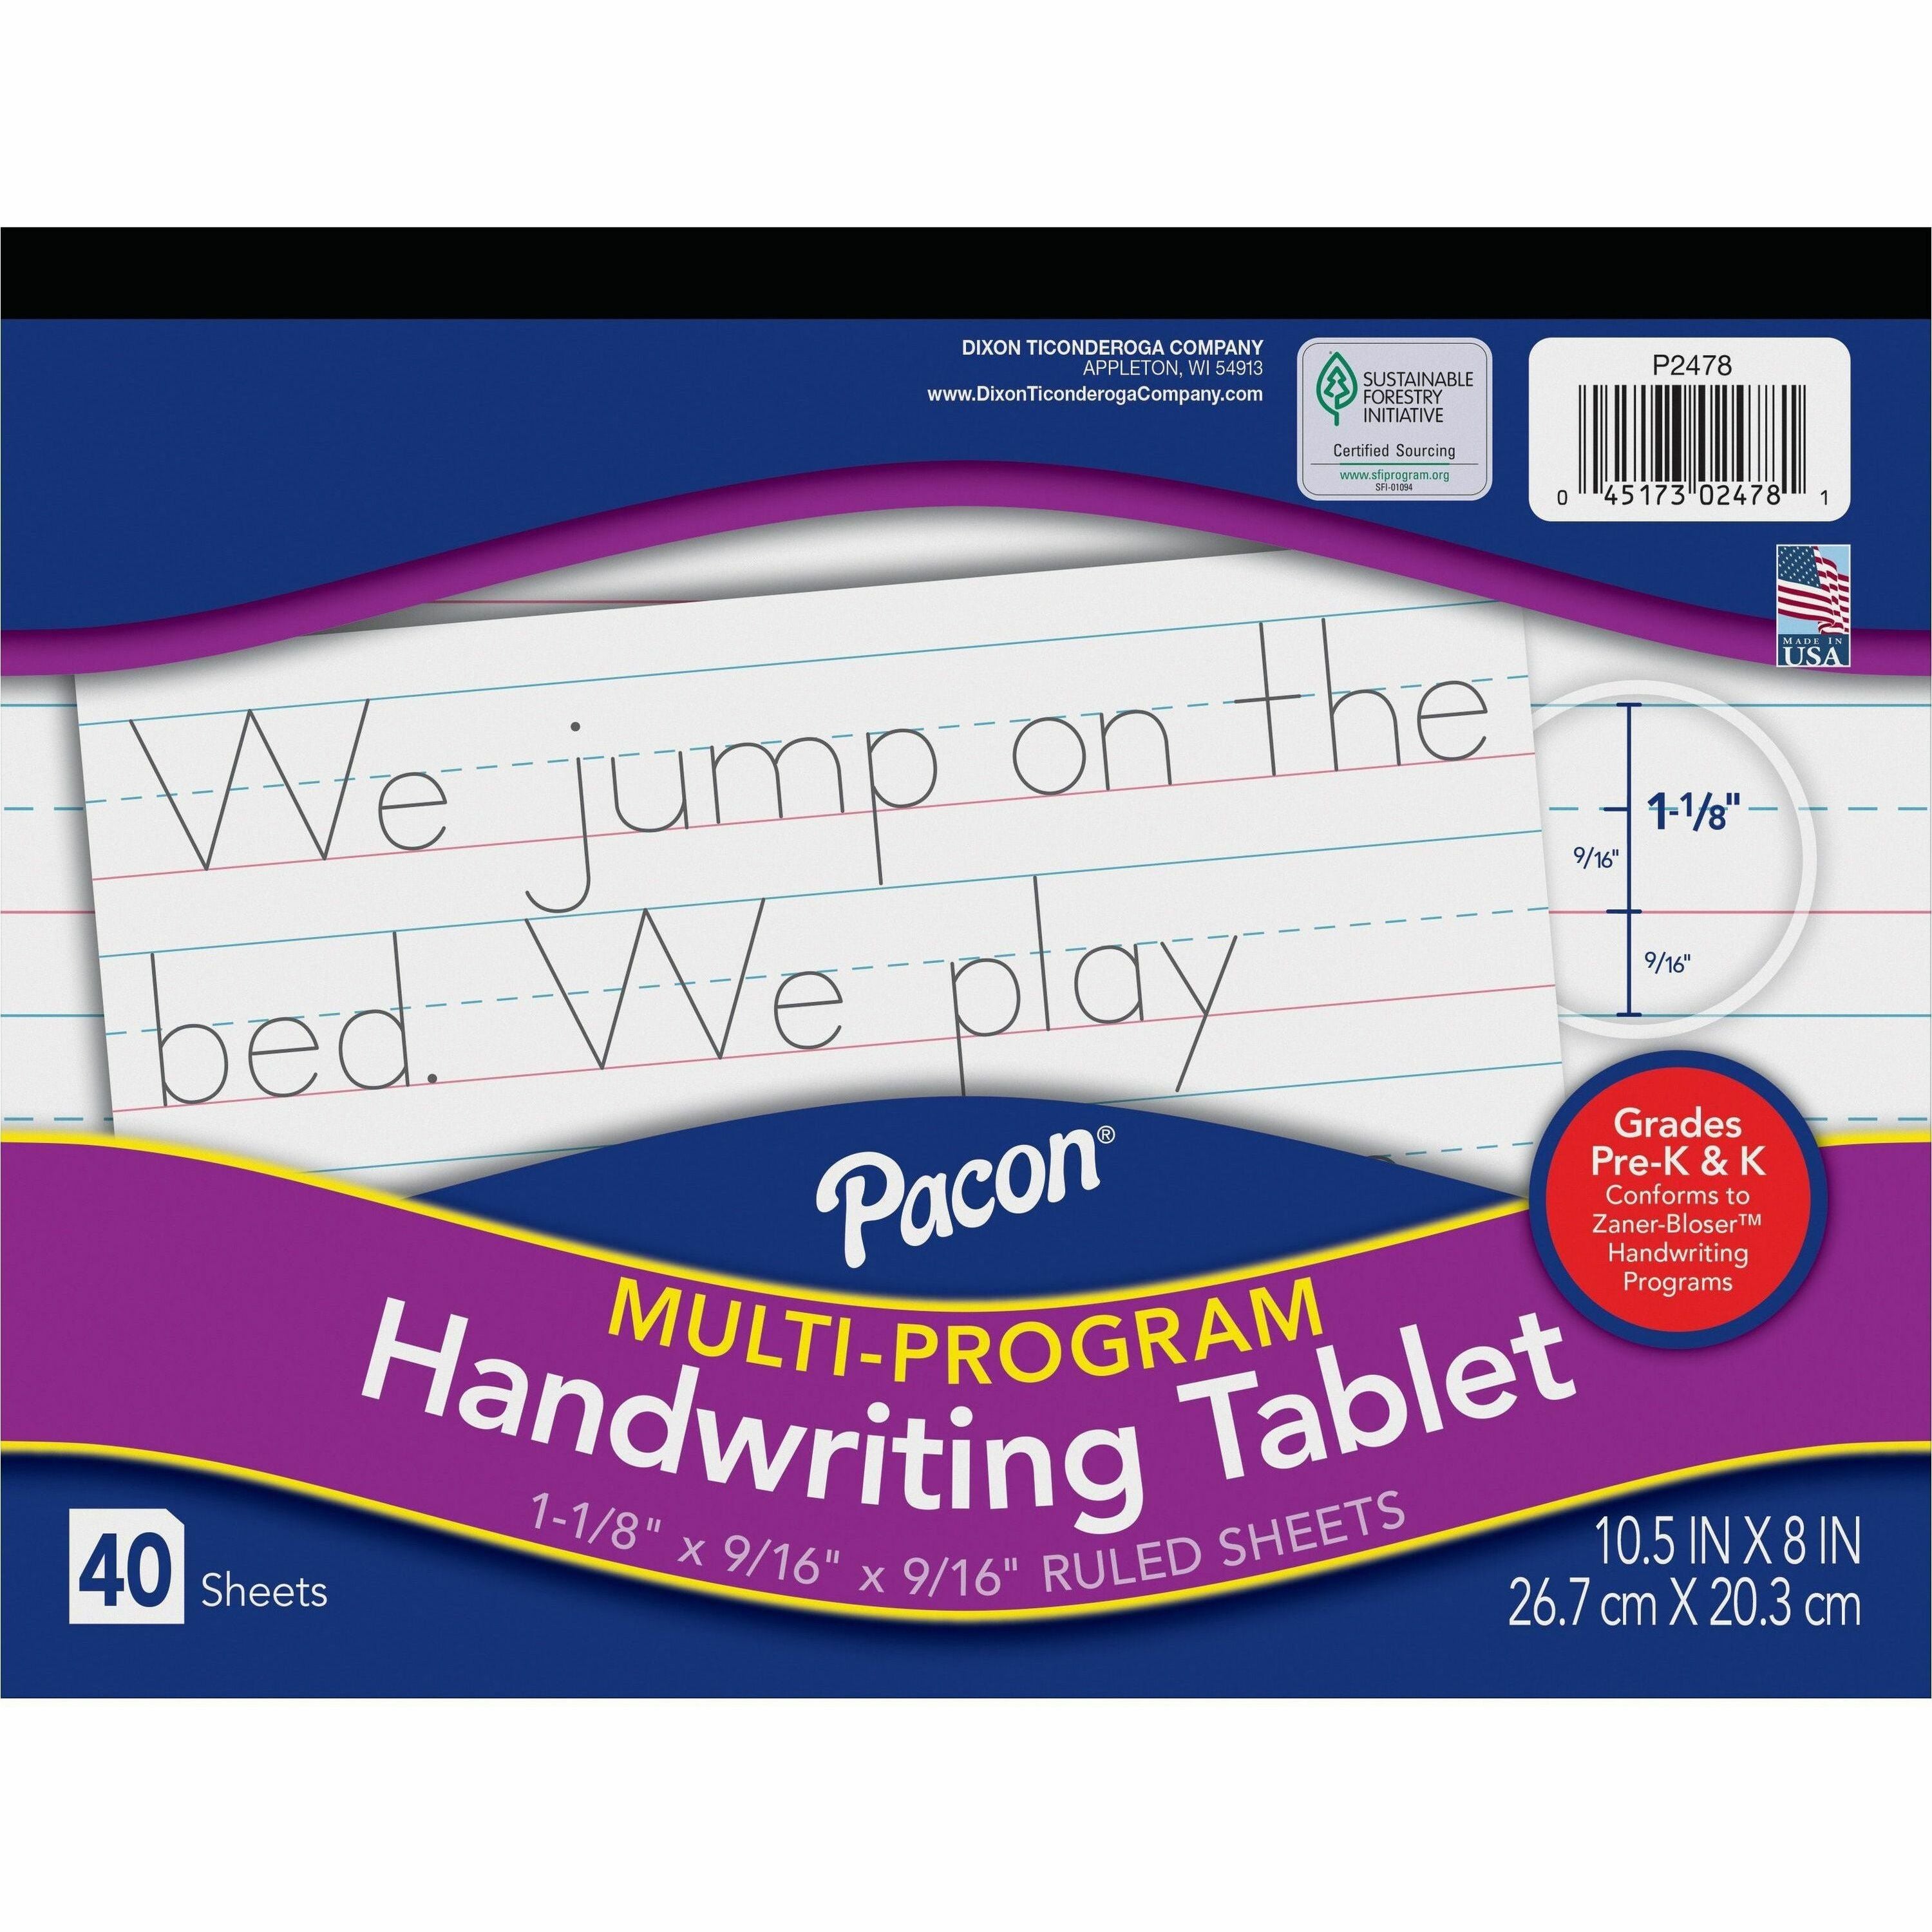 pacon-multi-program-handwriting-tablet-40-sheets-both-side-ruling-surface-ruled-113-ruled-10-1-2-x-8-white-paper-assorted-cover-chipboard-backing-recyclable-film-wrapped-1-each_pac2478 - 1